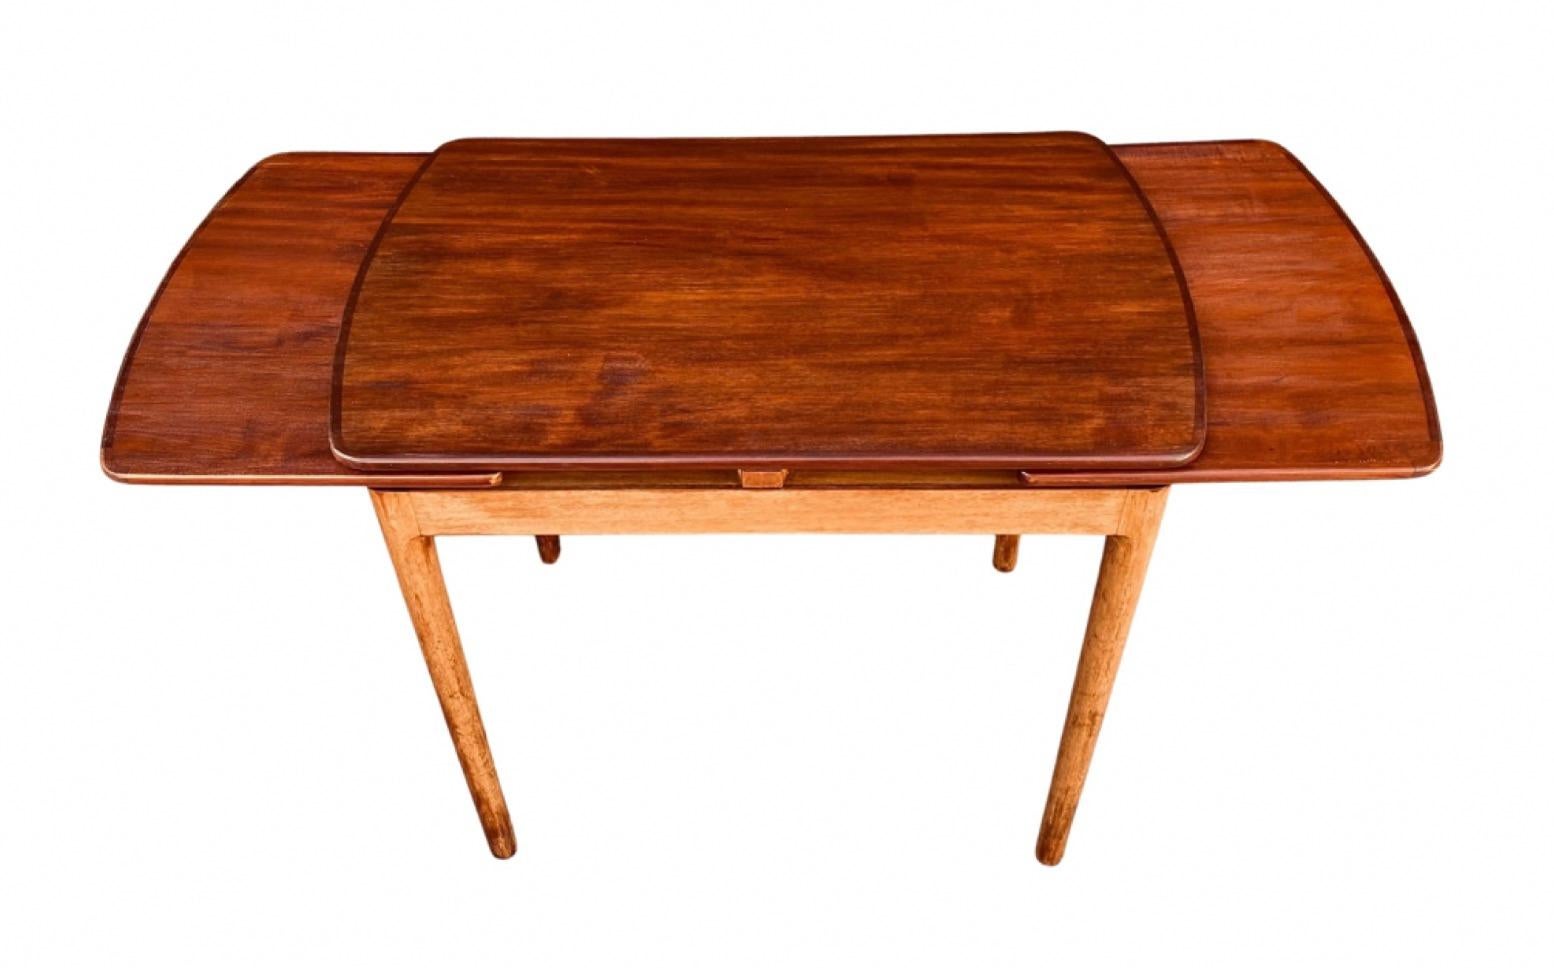 Elegant and smart console table/coffee table in mahogany.

Designed and made in Denmark I the 1950s.

Refurbished and in excellent condition.

Length without extensions: 74cm.